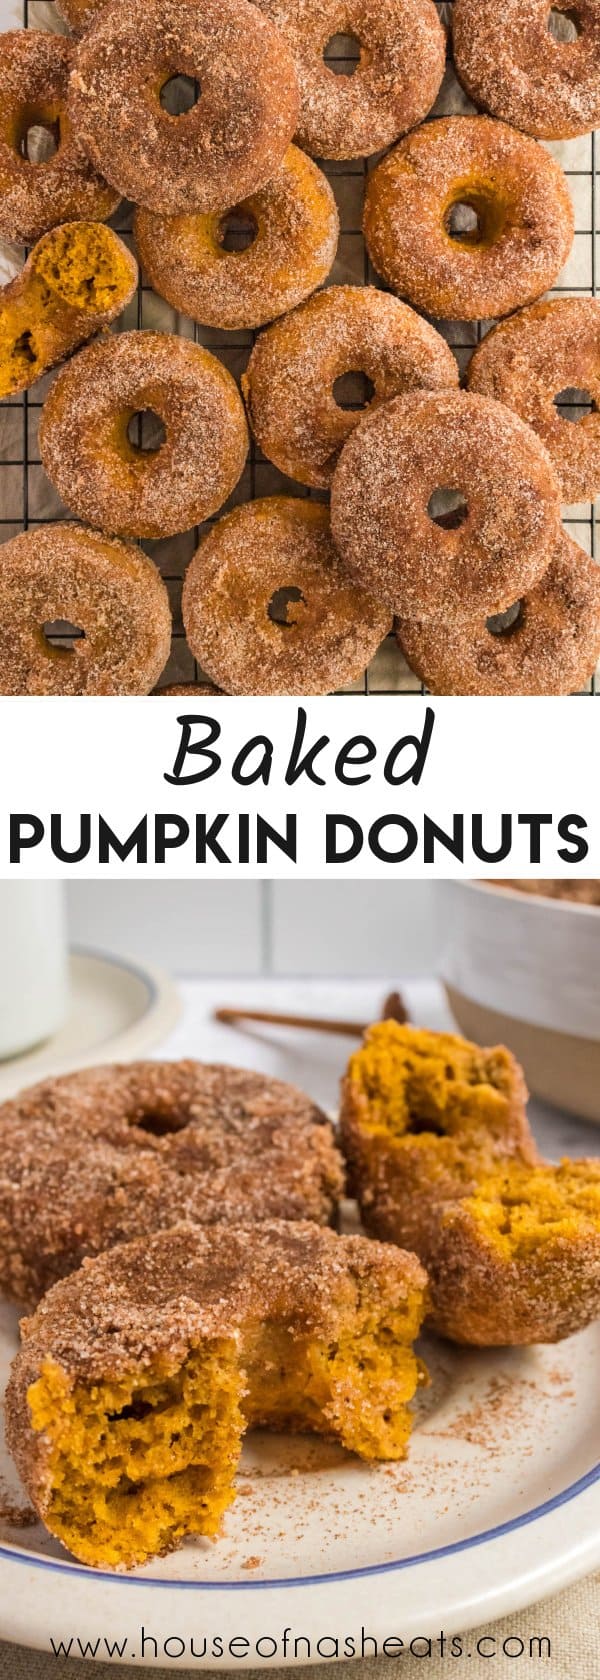 A collage of images of baked pumpkin donuts with text overlay.